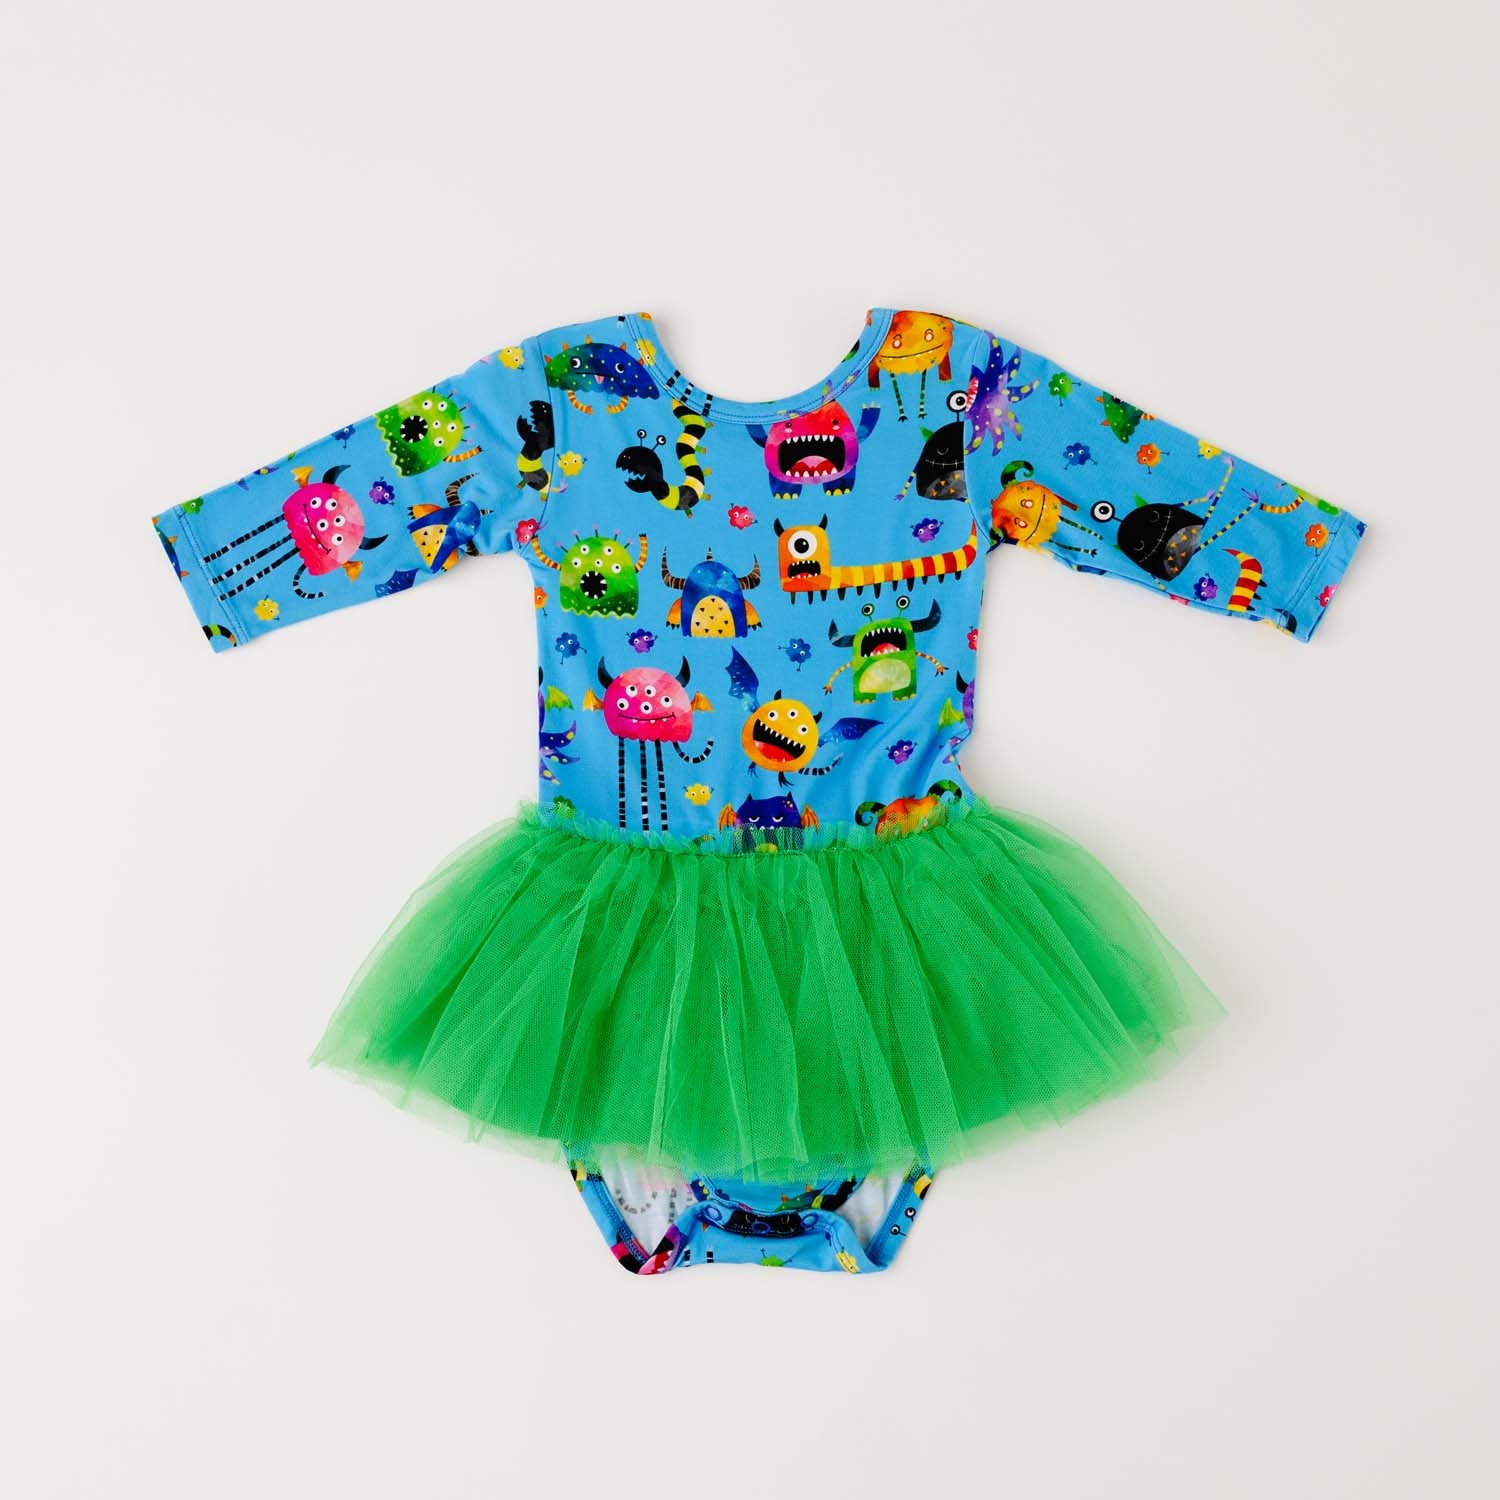 Cole's Spooky Monsters 2022 Half Sleeve Party Leotard Dress